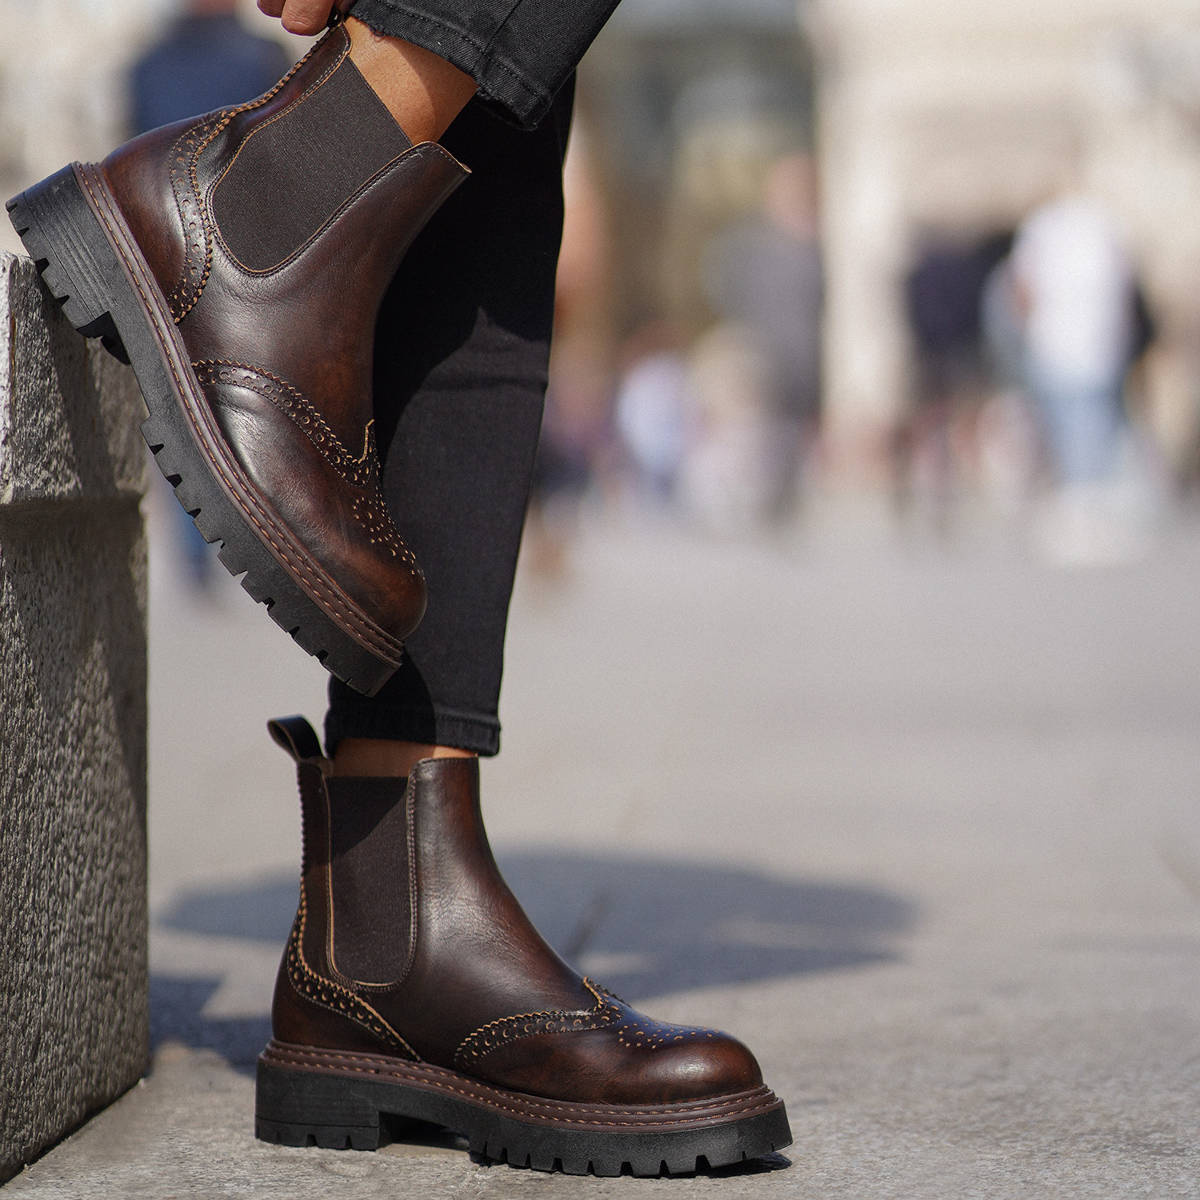 Brown Chelsea boots